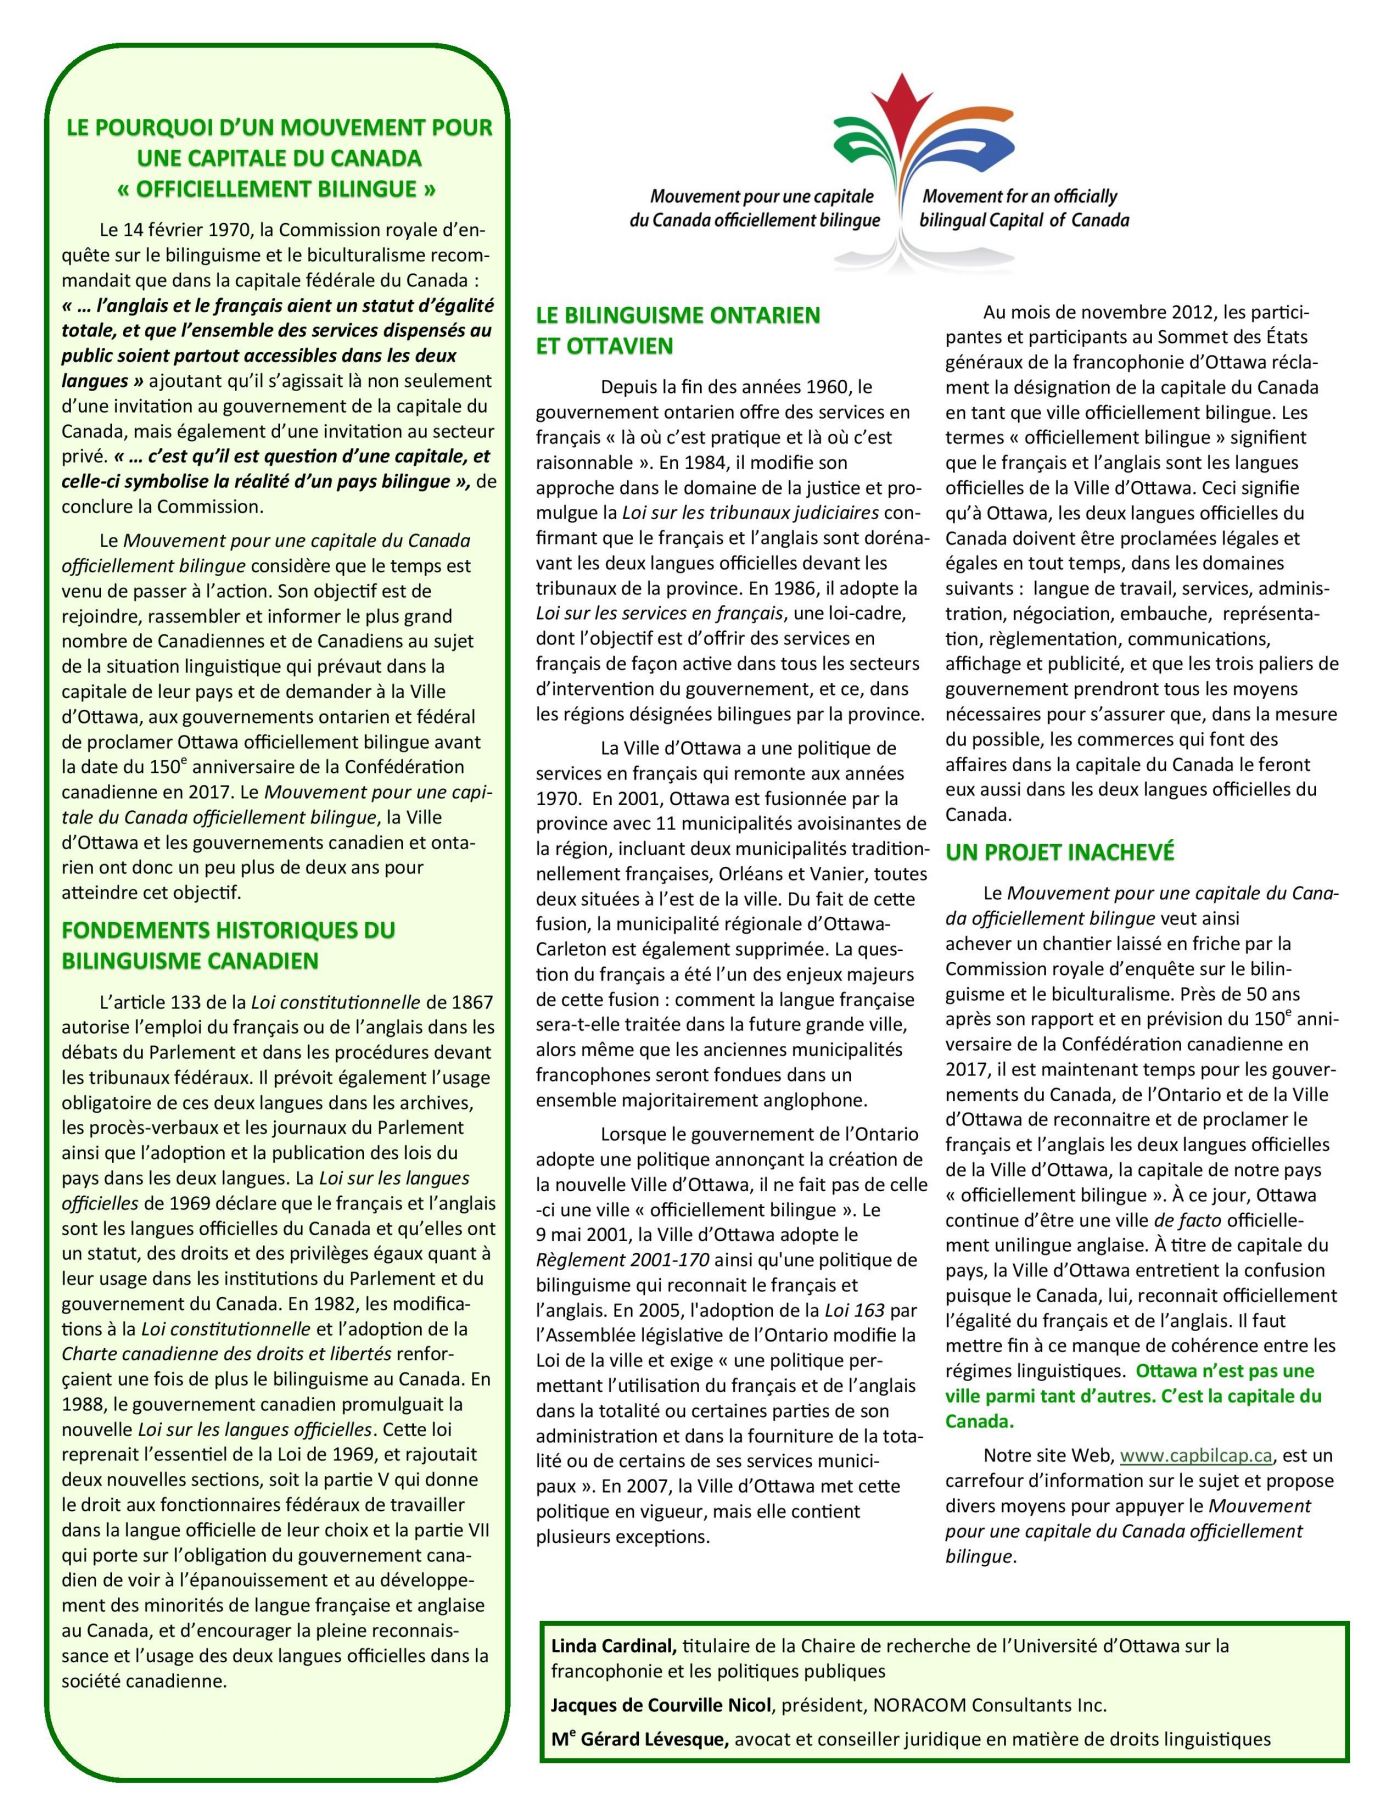 Colour screen capture with text printed in French. The logo of the Movement appears at the top of the page, with the name in French and English. A text, reproduced on a light green background, is framed to the left of the page. The main text is presented in two columns, with titles in green capital letters separating the different sections. A box at the bottom of the page contains the names of the authors.